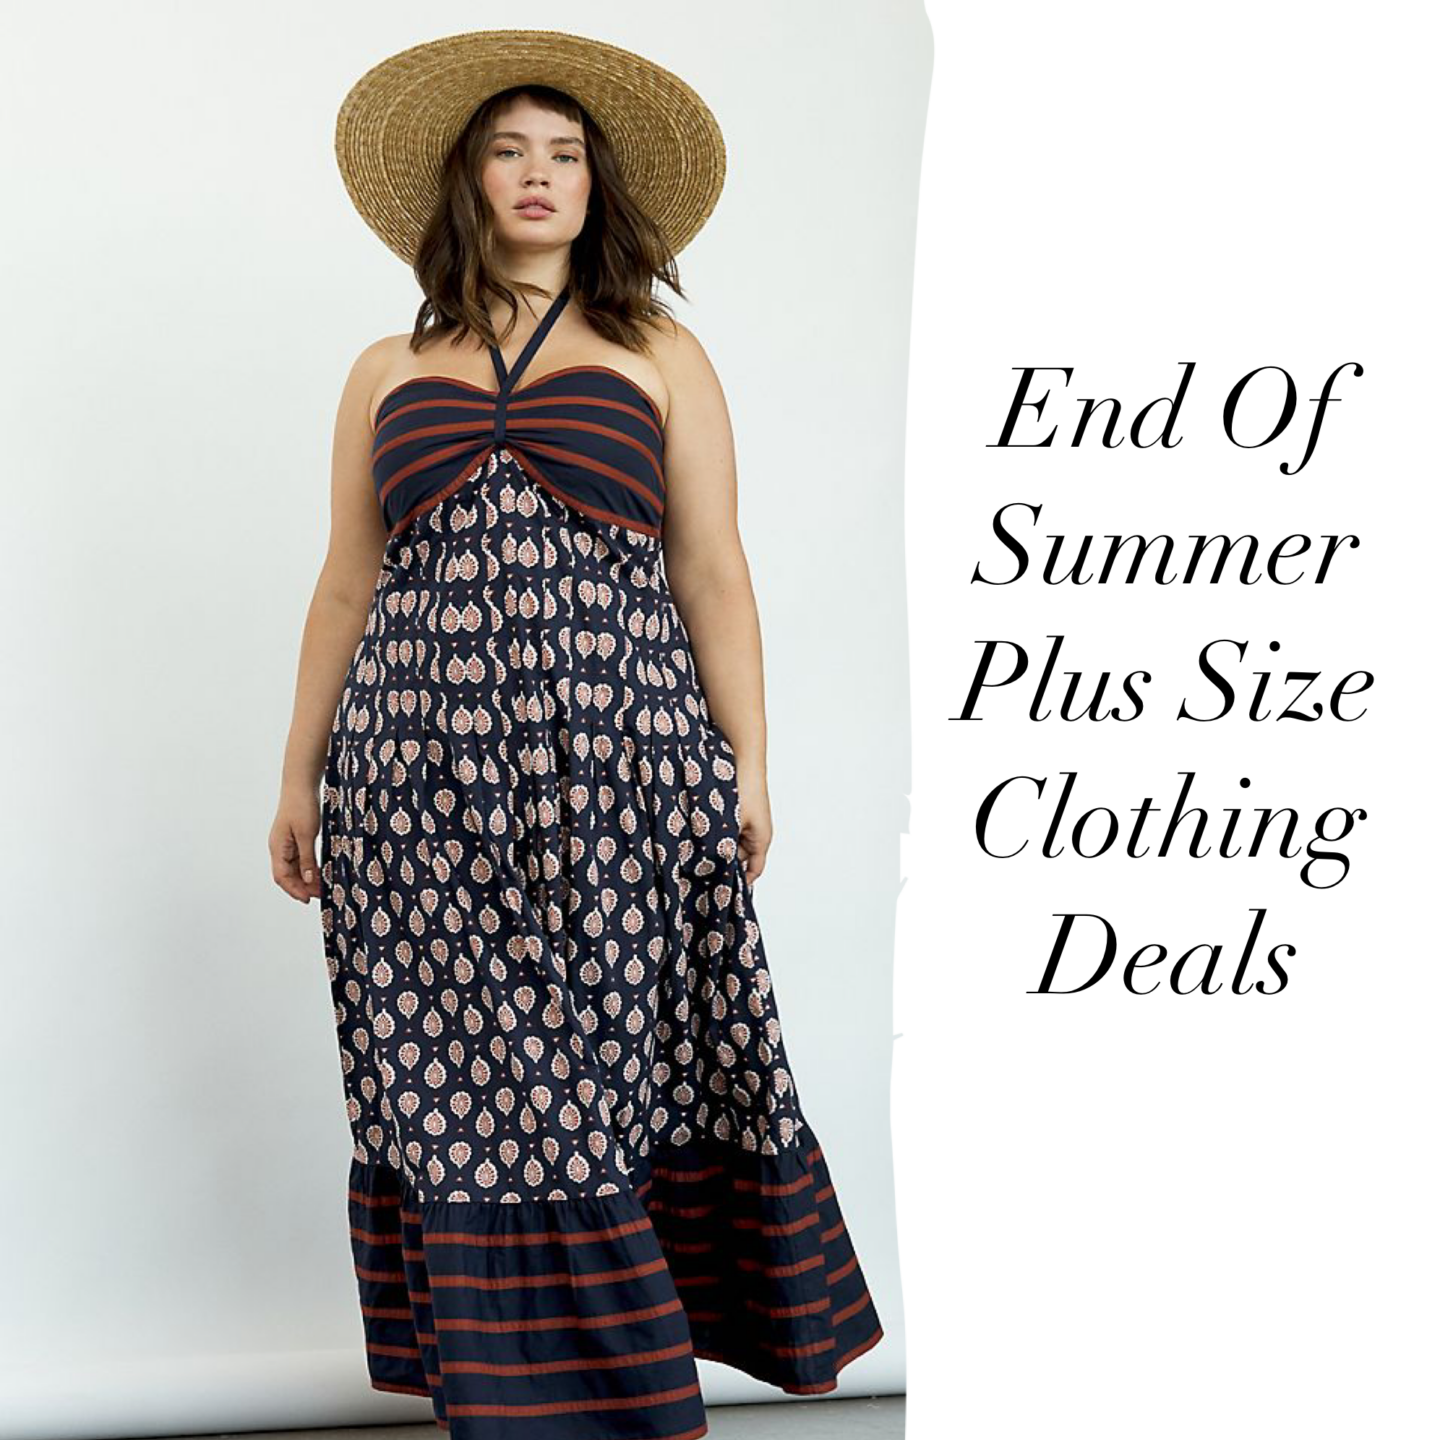 Best Plus Size End Of Summer Sales For Fashion & Beauty